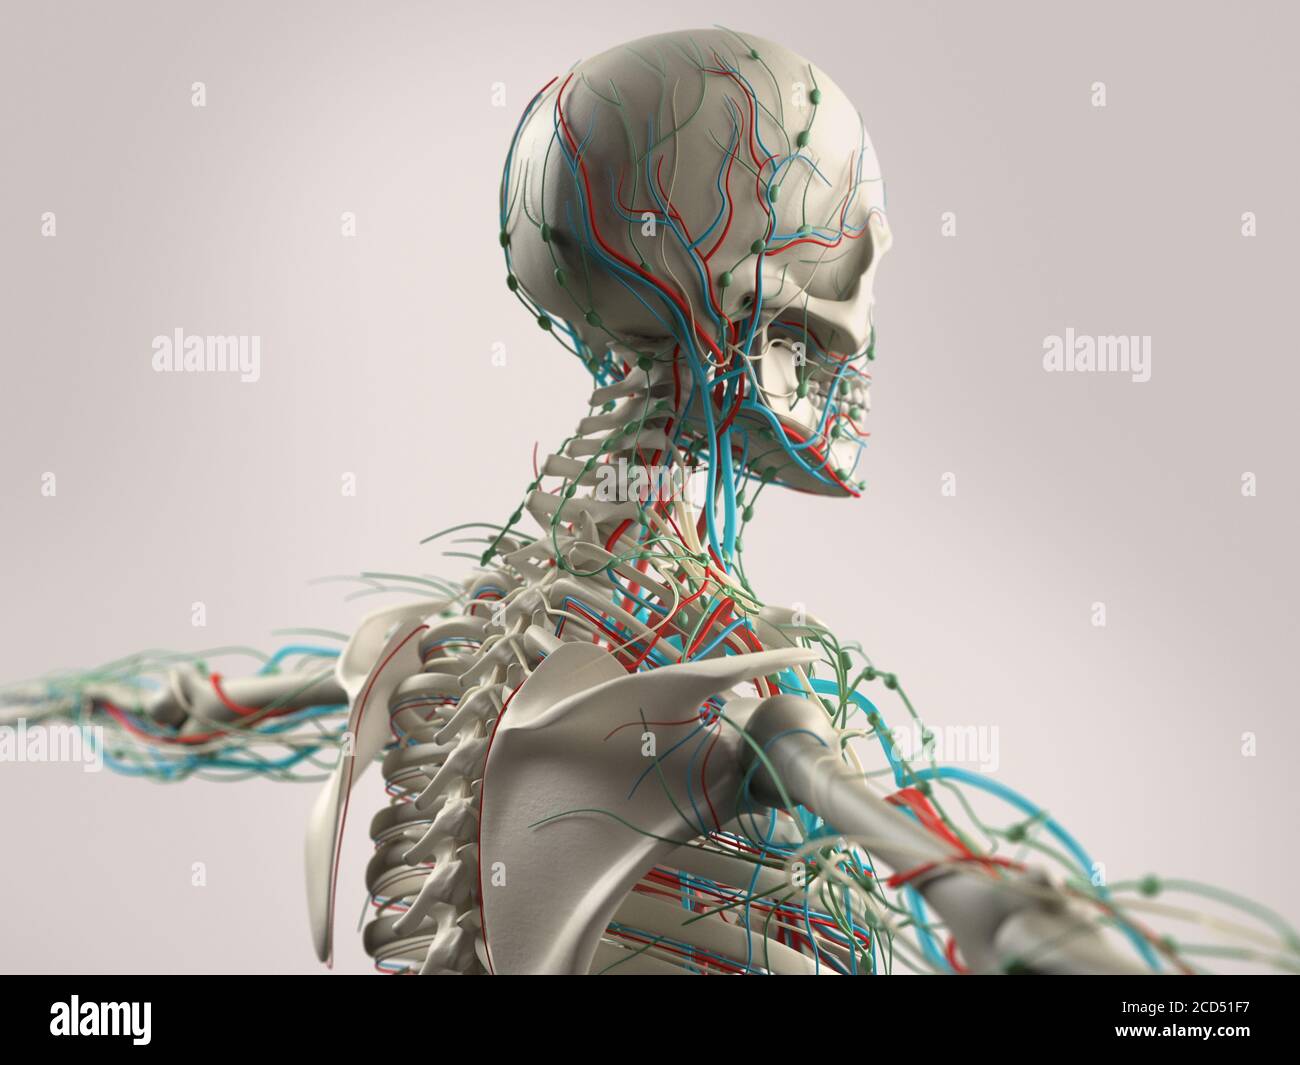 Human Anatomy Showing Face Head Shoulders And Back Muscular System Bone Structure And Vascular System Stock Photo Alamy